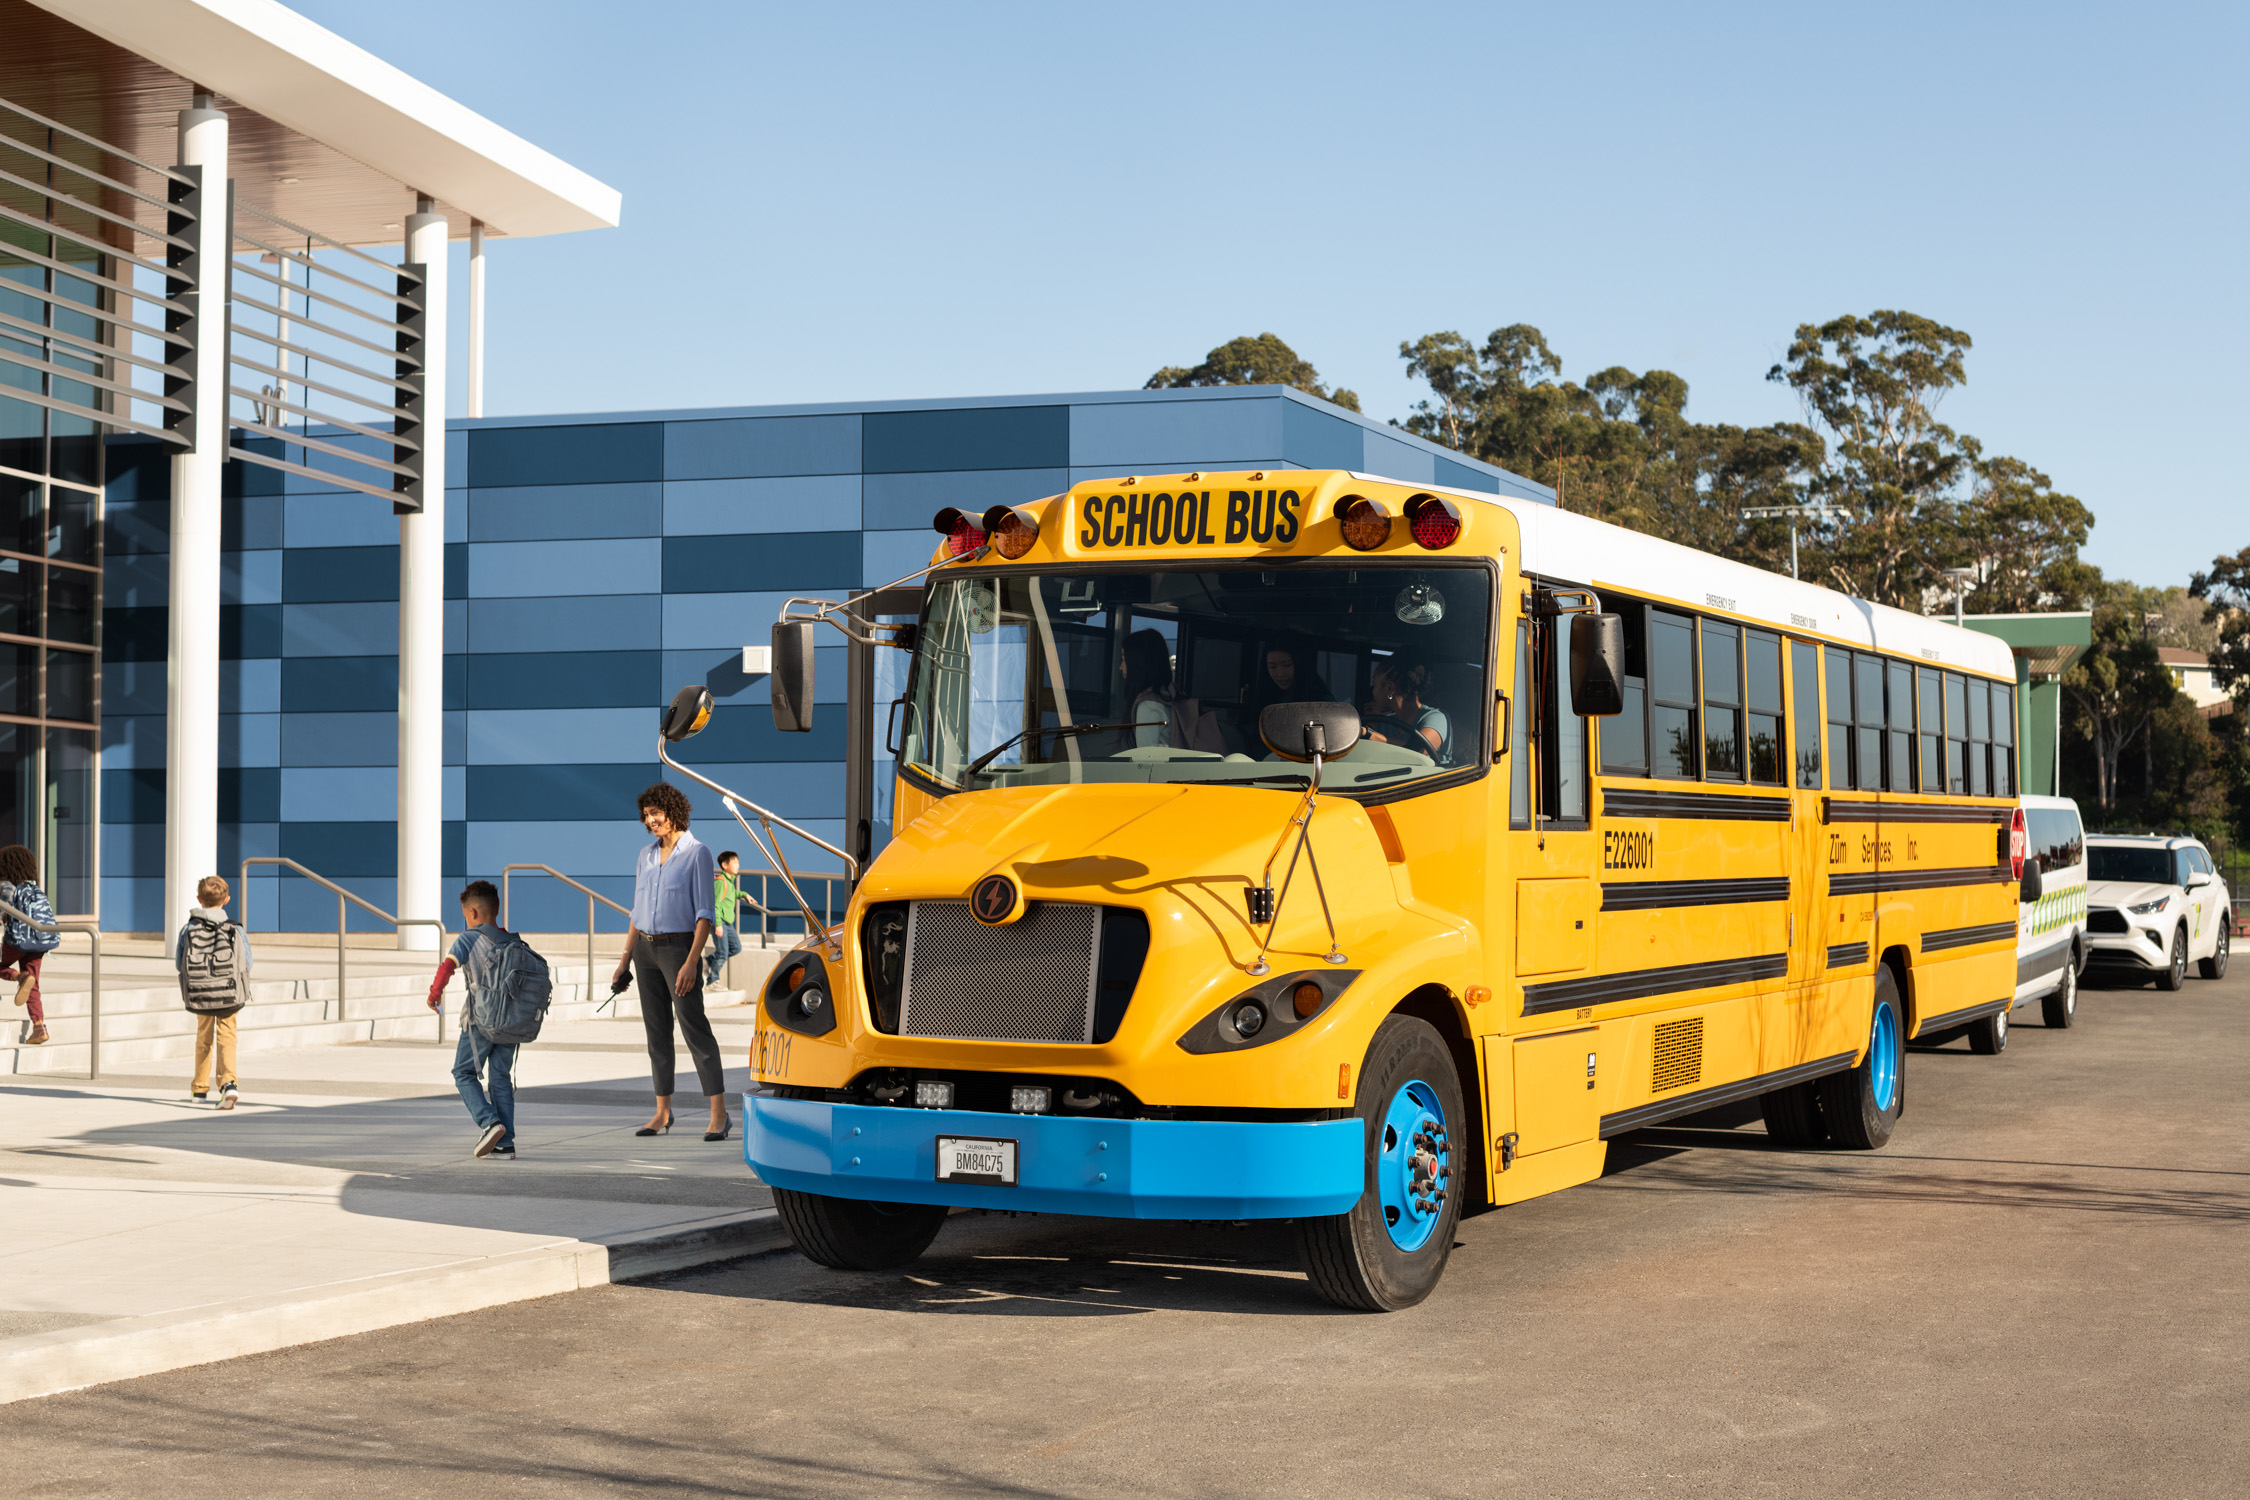 Zum School Bus delivers students safely, efficiently and sustainably to school